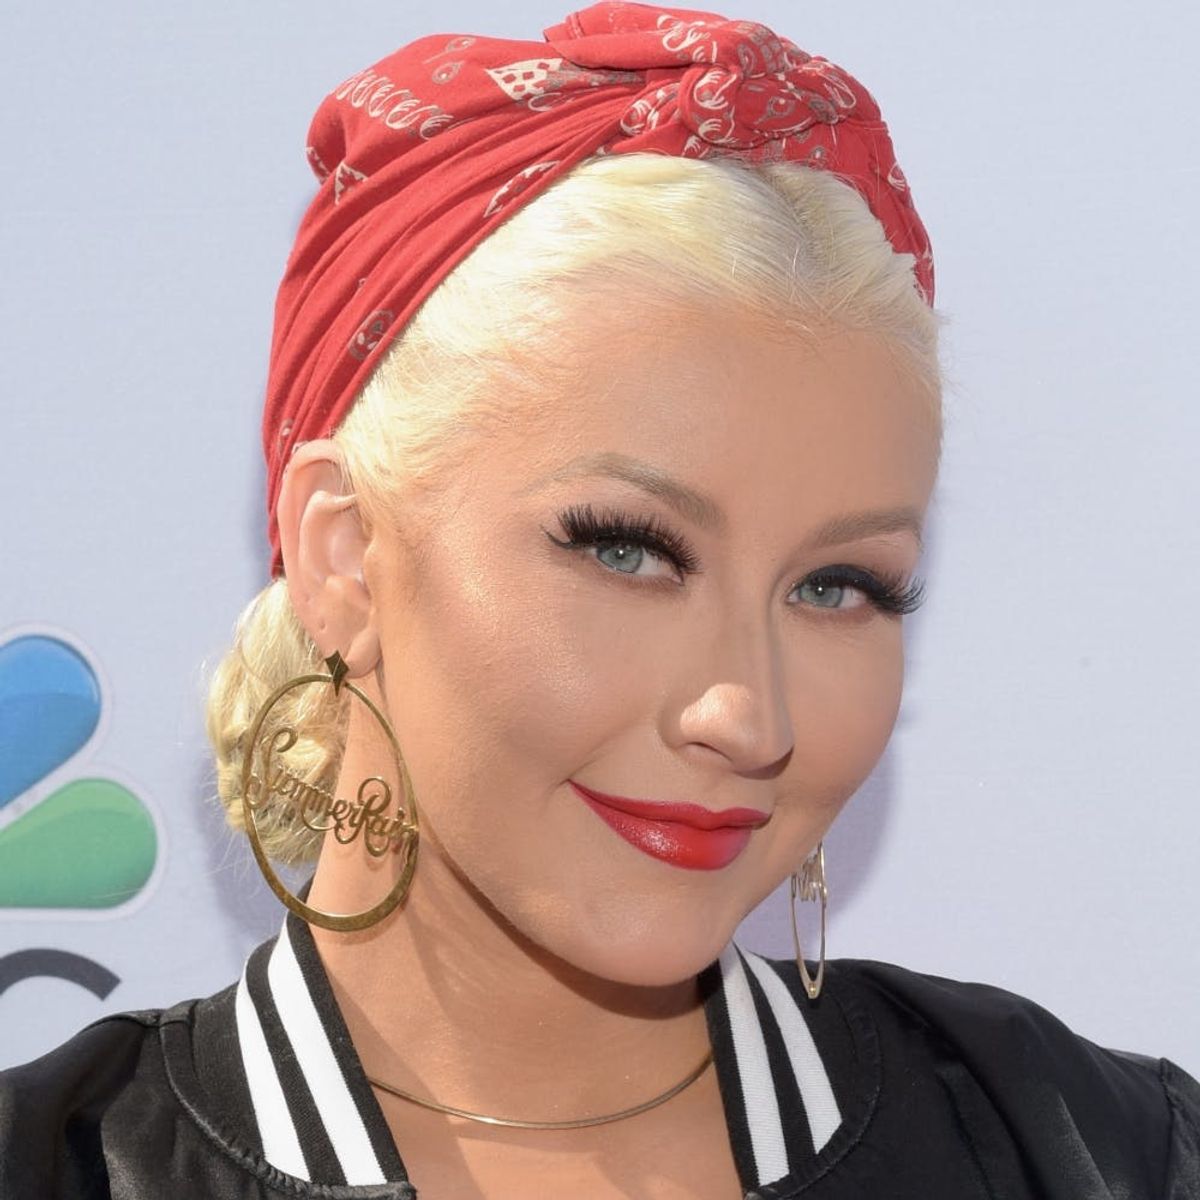 Christina Aguilera’s Pierced Braid Is Something Everyone Needs to Try